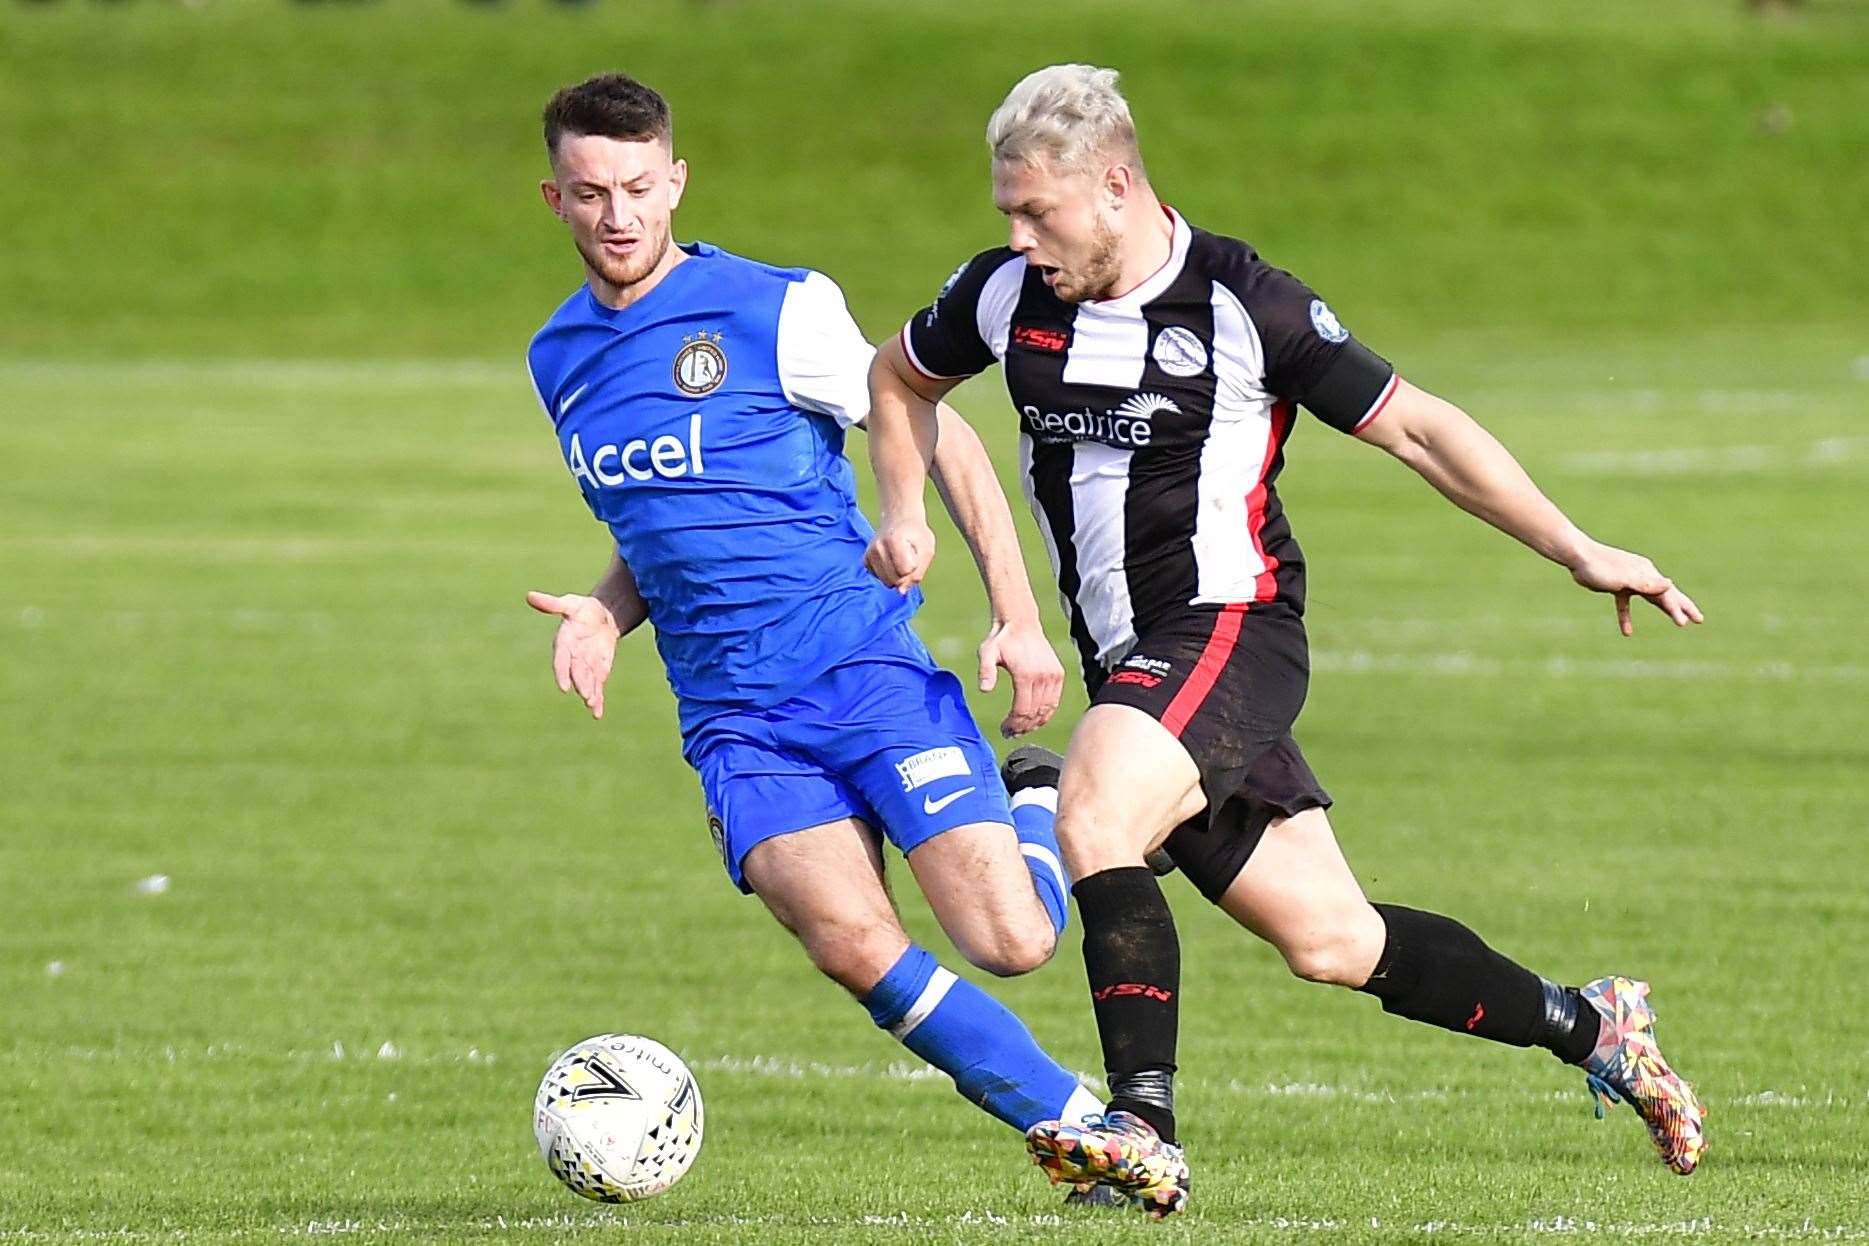 Wick Academy's Jack Halliday powers past Paul Scobie of Lochee United in the Scottish Cup last weekend. Picture: Mel Roger